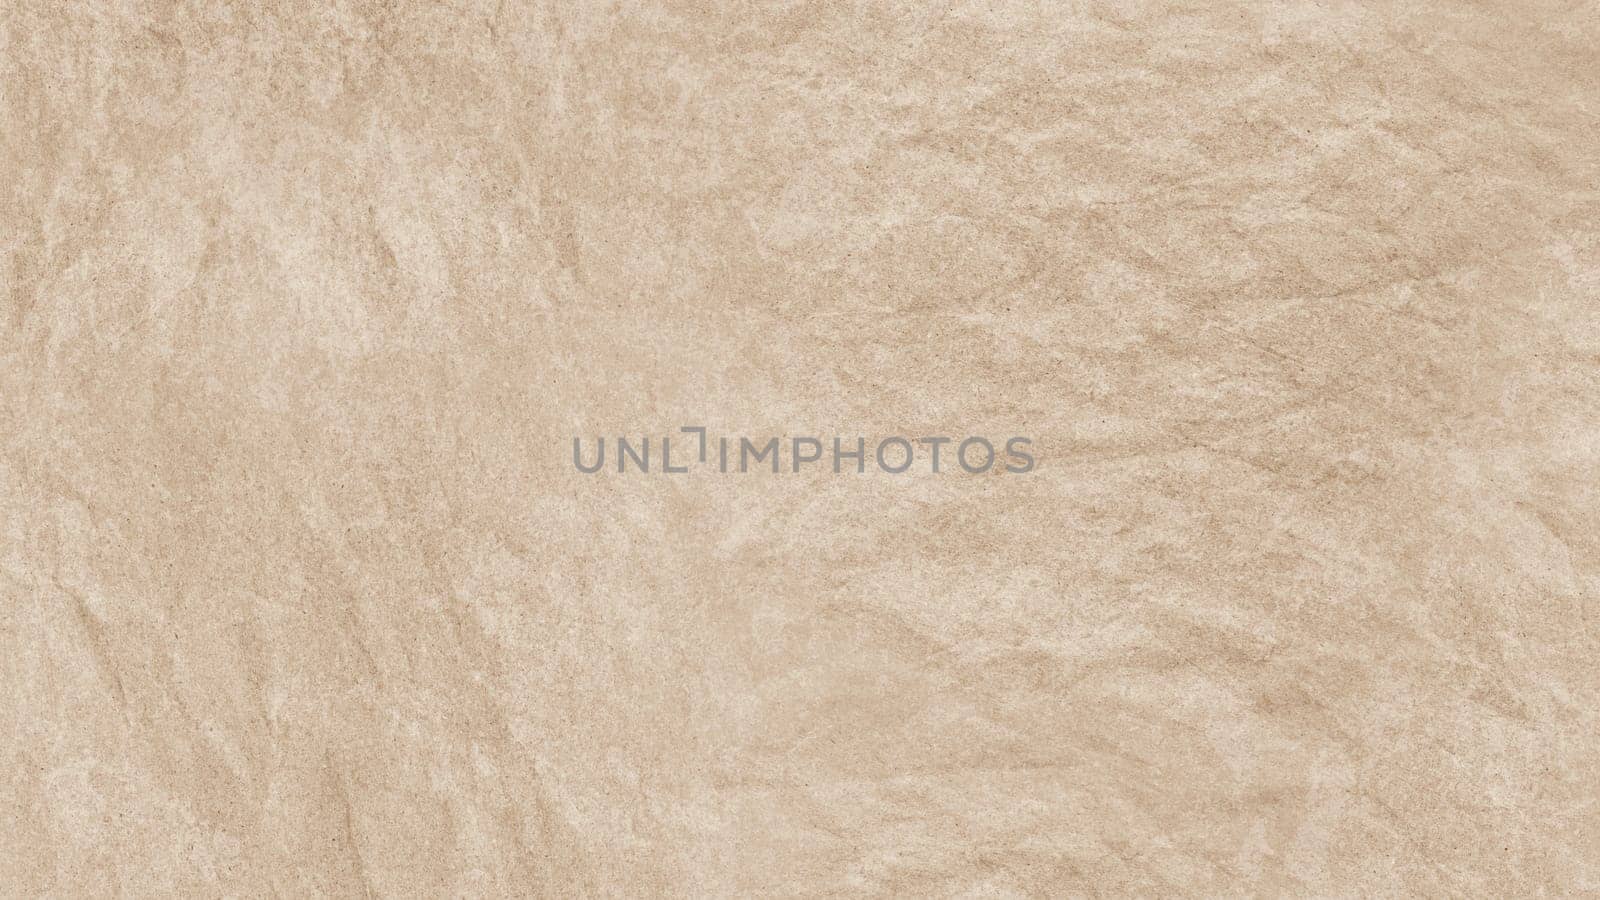 Crumpled paper texture. Abstract background. Orange brownish color. High quality photo